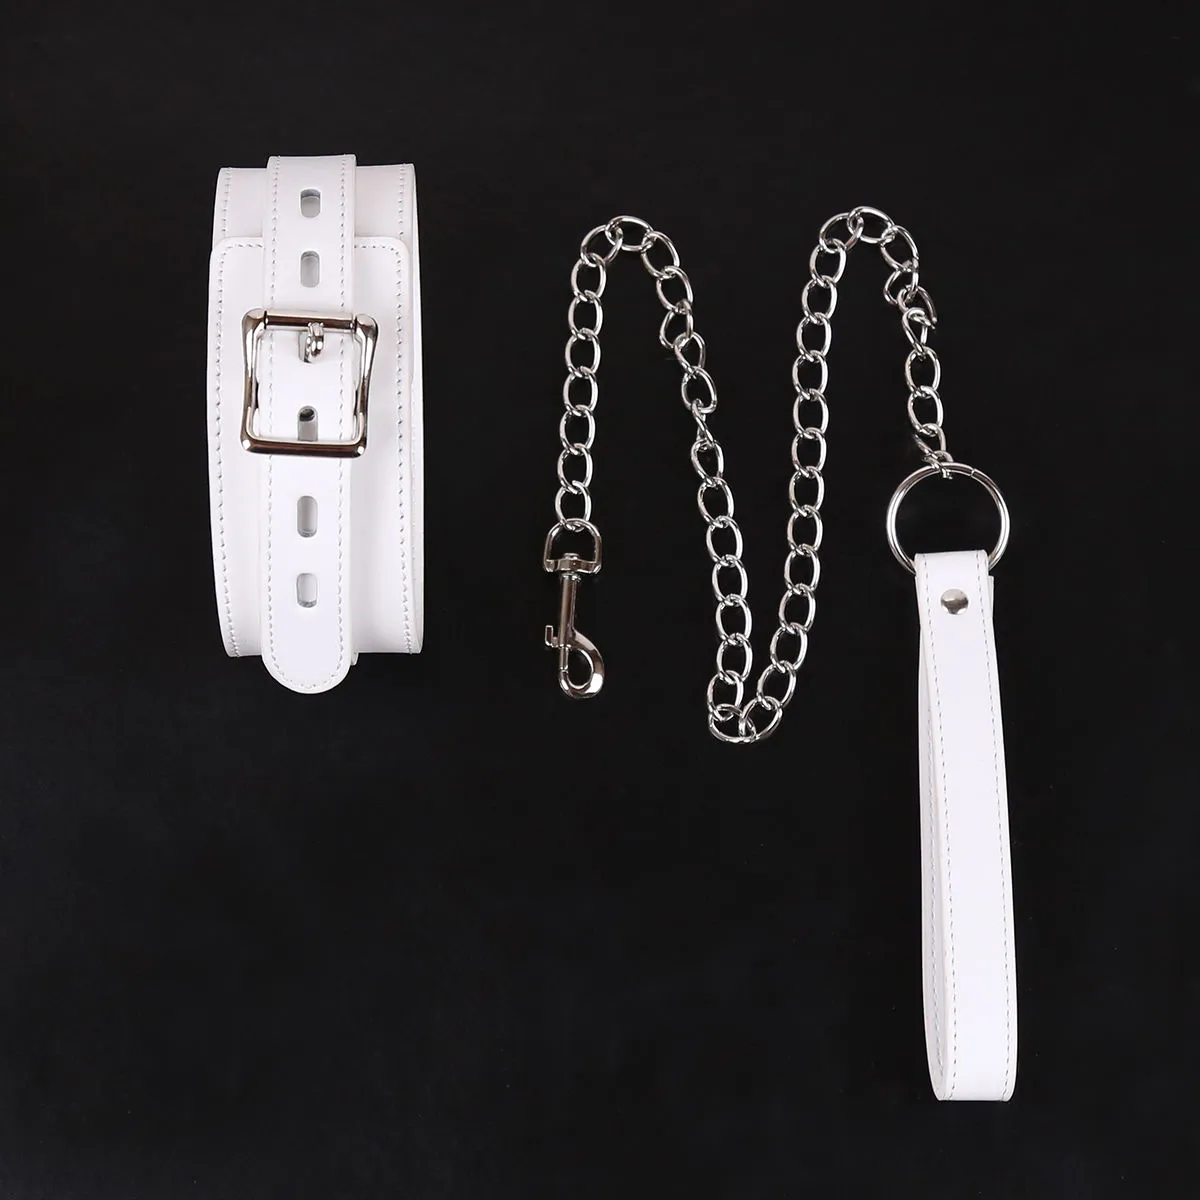 Sexy White Soft Bondage Slave Collar With Stainless Steel Leash #t89